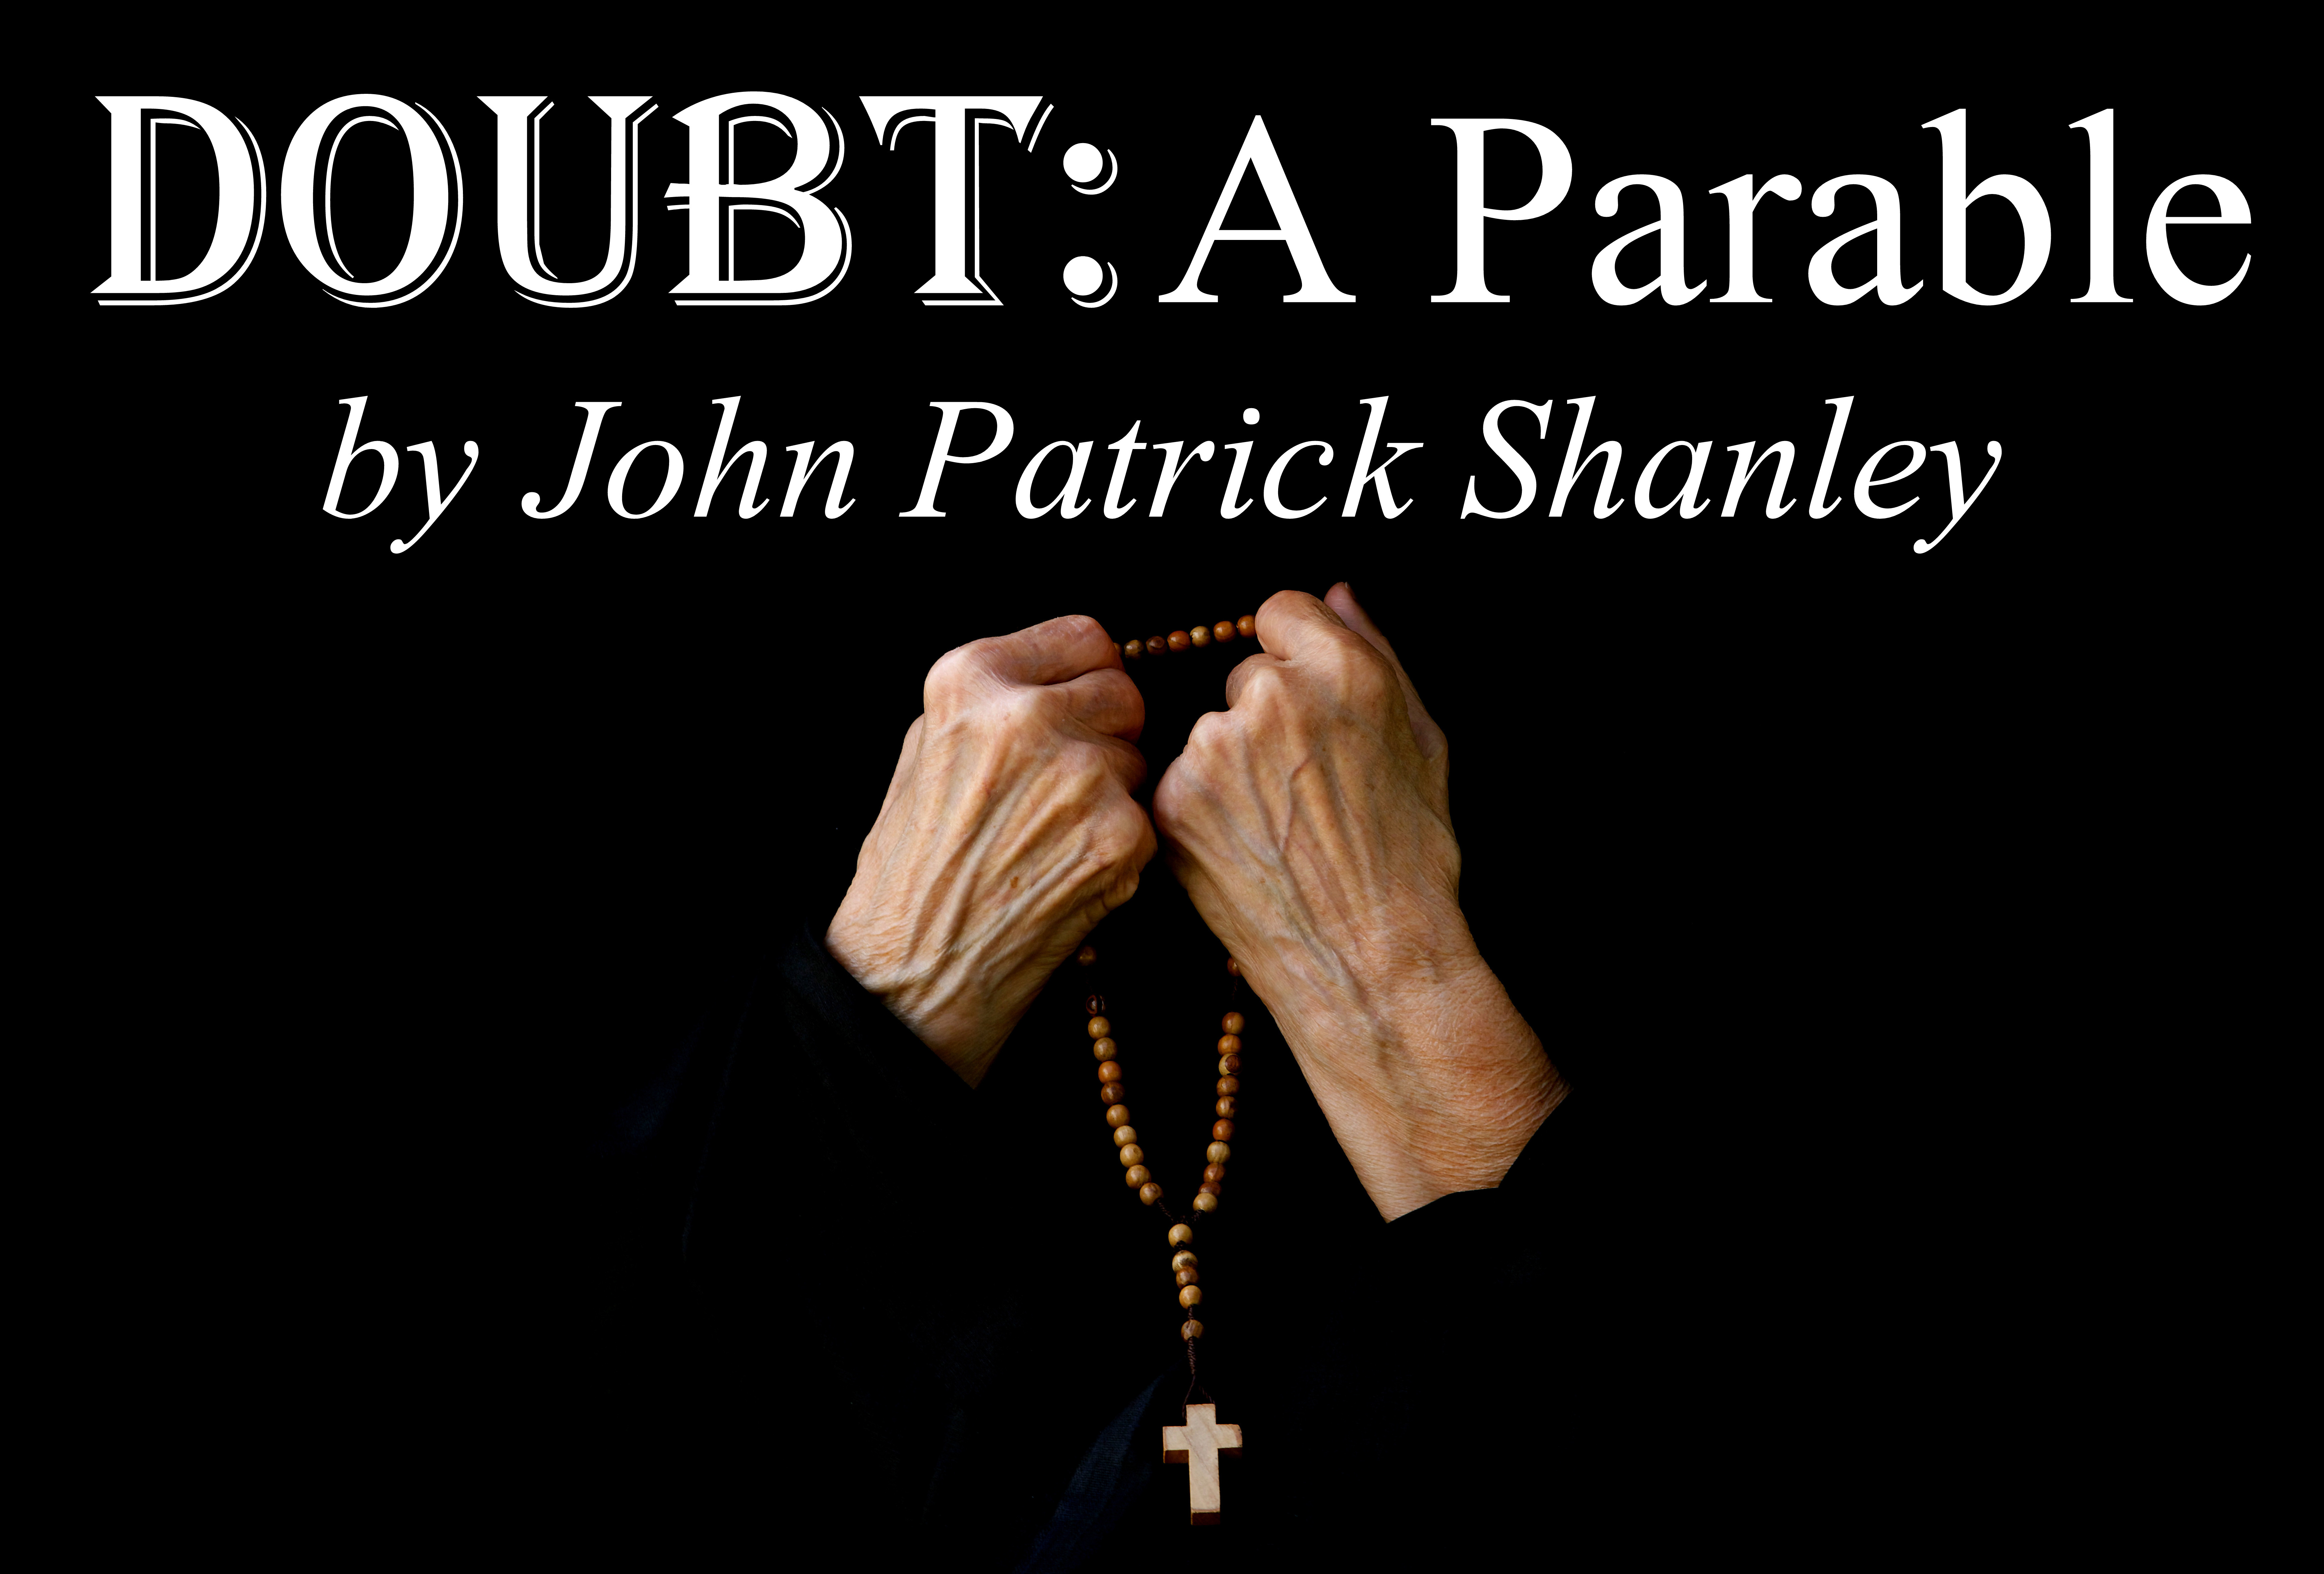 Doubt: A Parable Summary and Study Guide